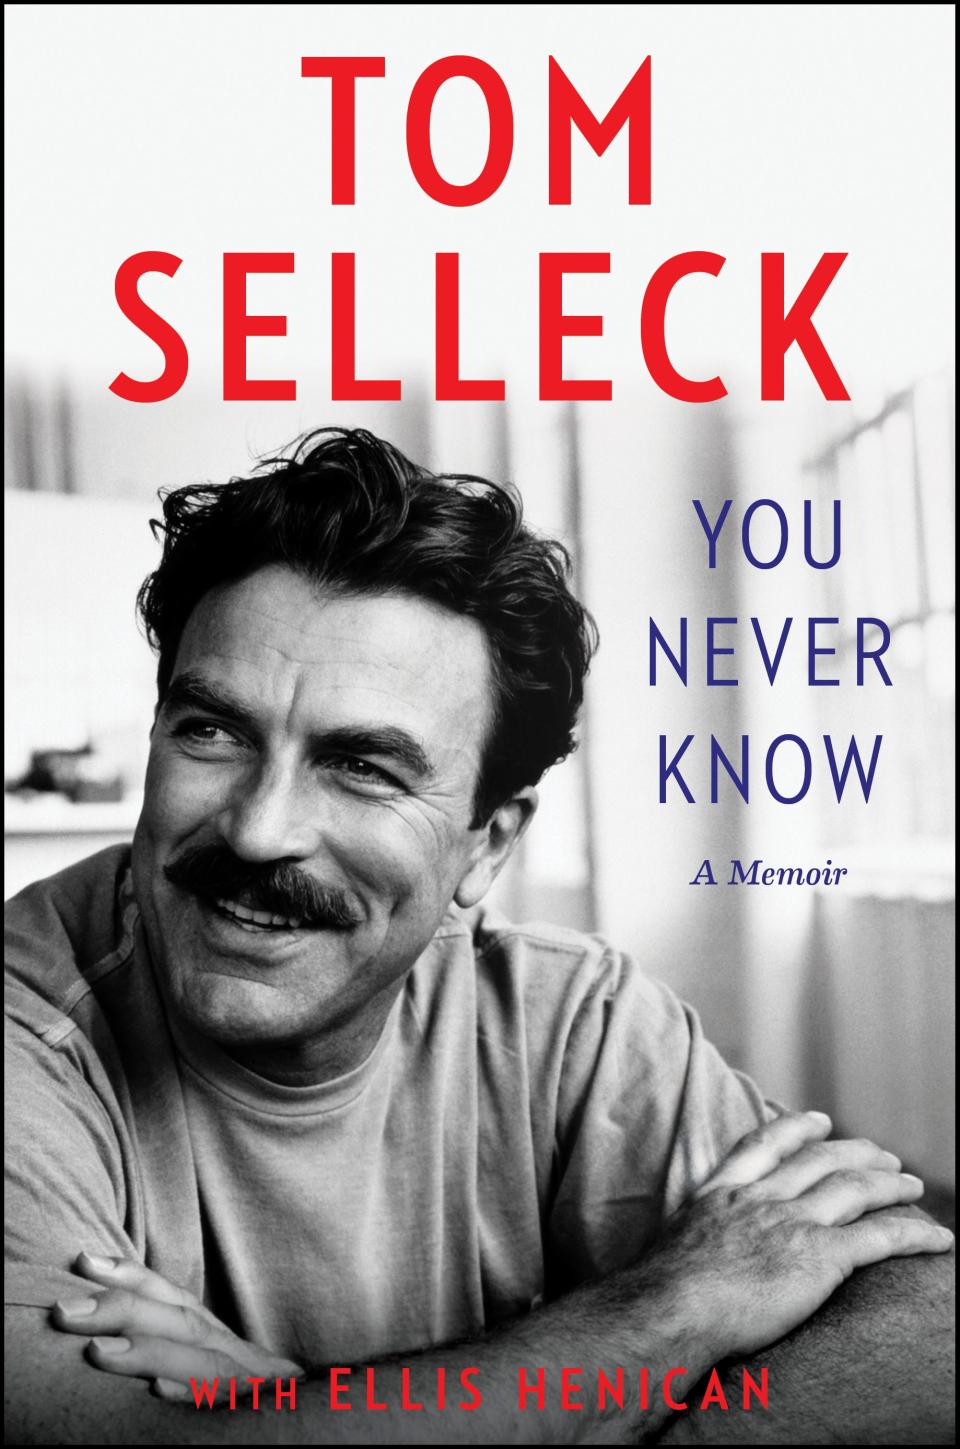 "You Never Know" by Tom Selleck